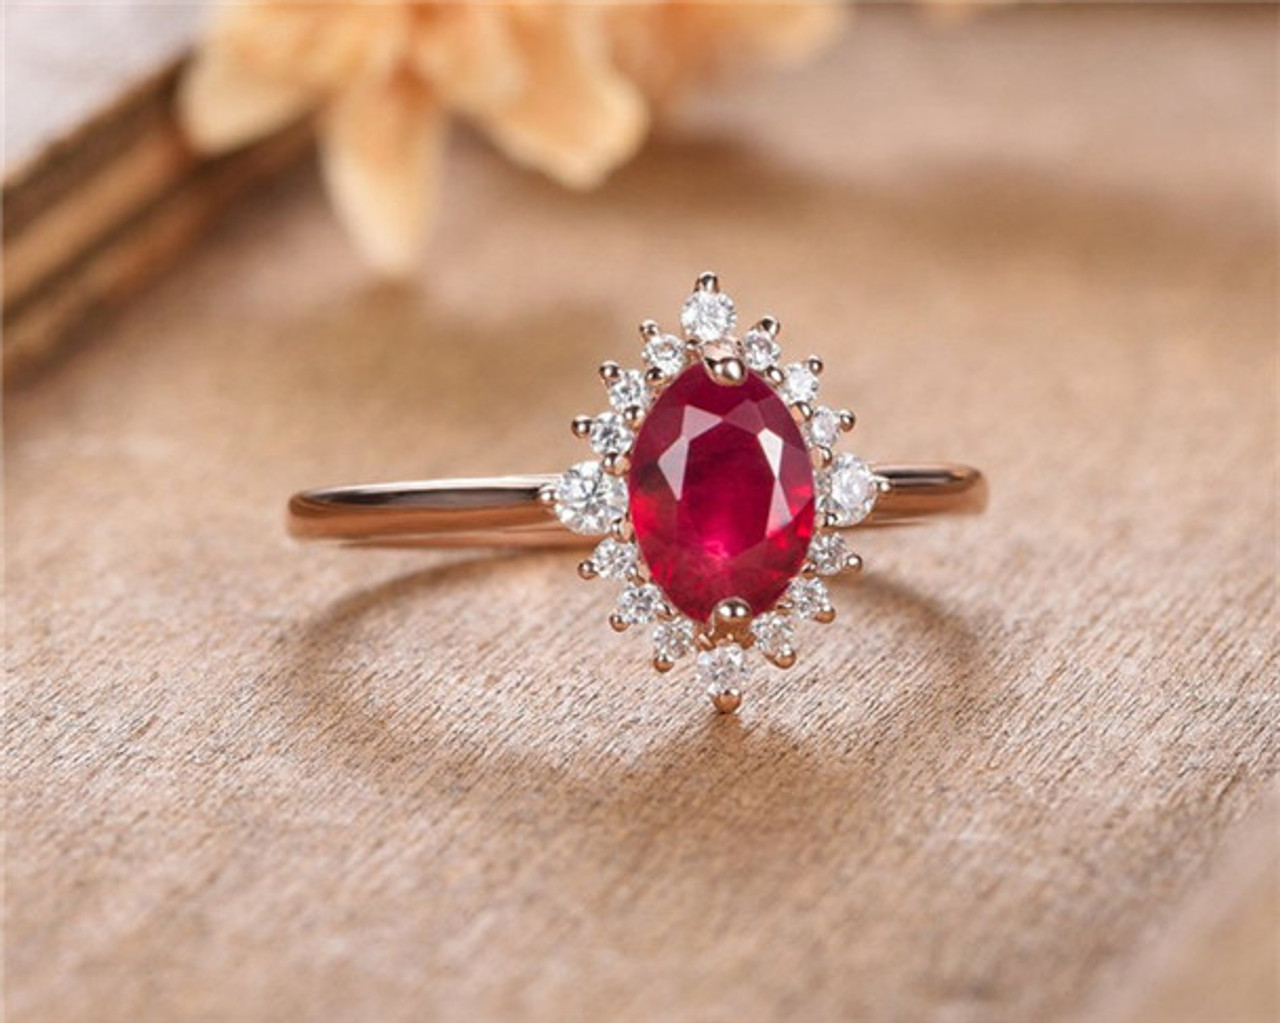 Buy Indian Ruby Ring I Statement Ring I Rings For Women I Red Ruby Stone I  925 Sterling Silver I Handmade Ring For Her (10) at Amazon.in